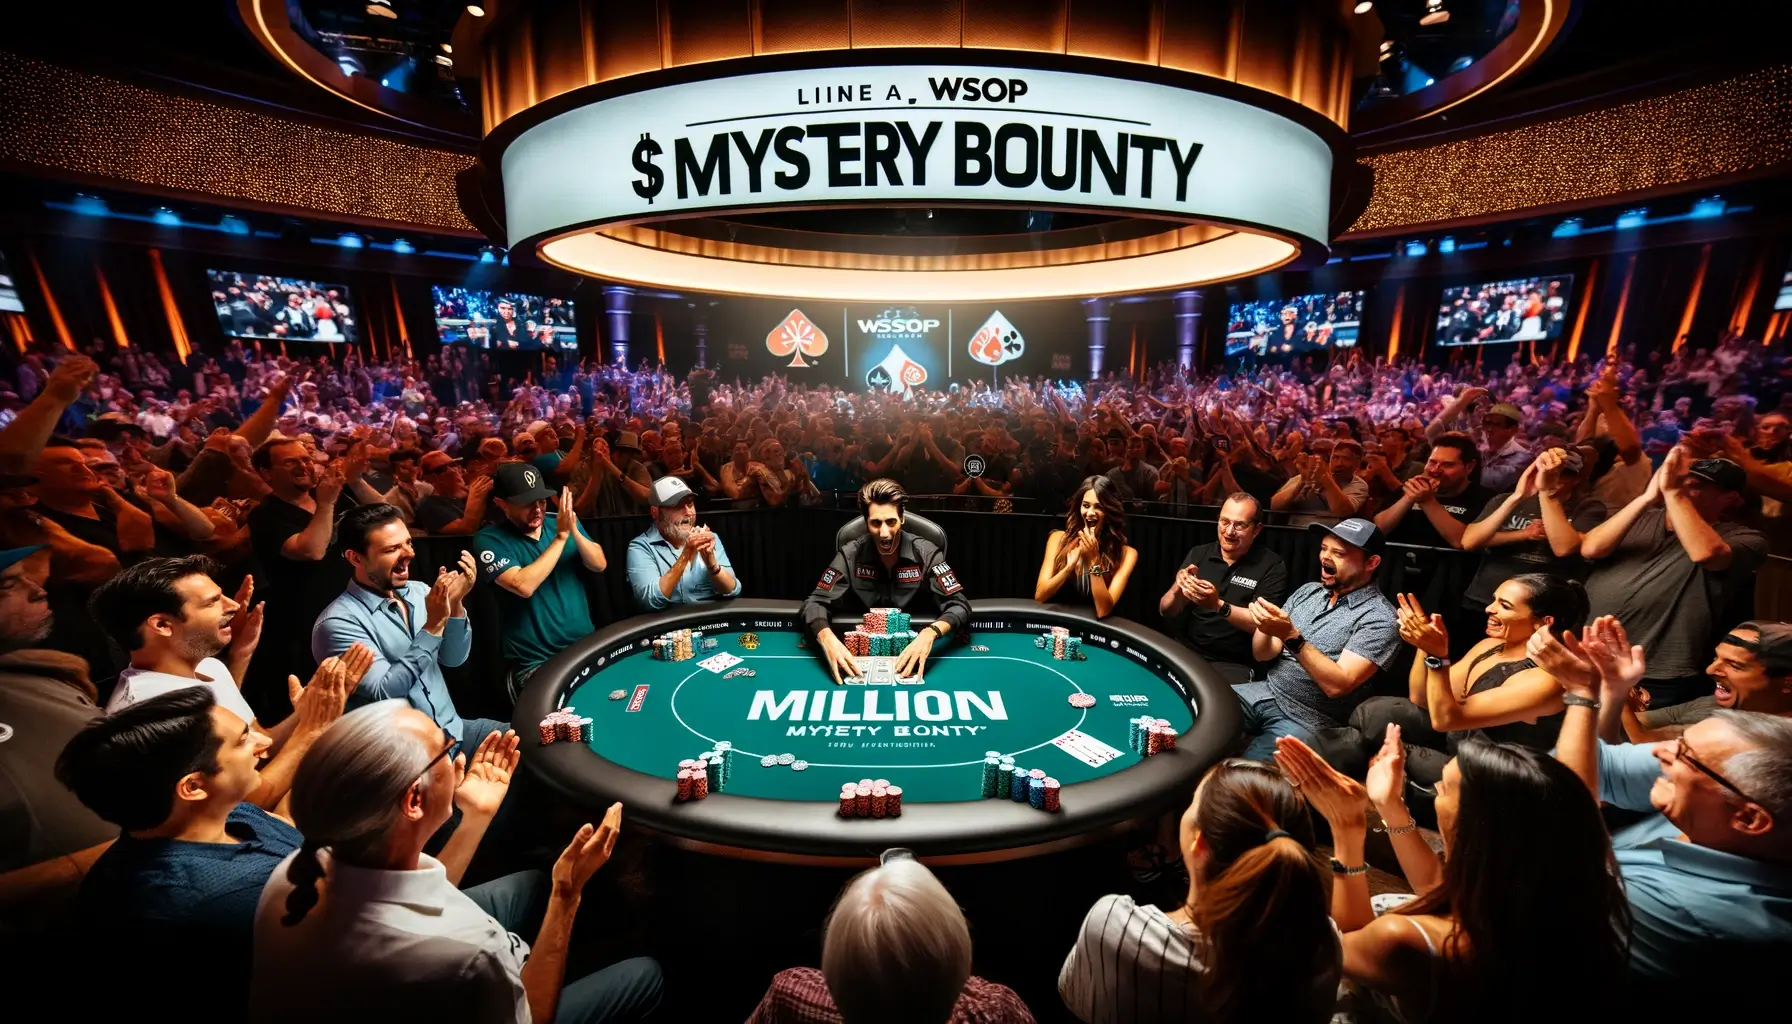 A thrilling scene from the WSOP Mystery Bounty event, showing a lively poker table with players focused on the game. A player reveals a $1 million bounty prize as the room erupts in applause and cheers, with spectators and other players reacting enthusiastically.